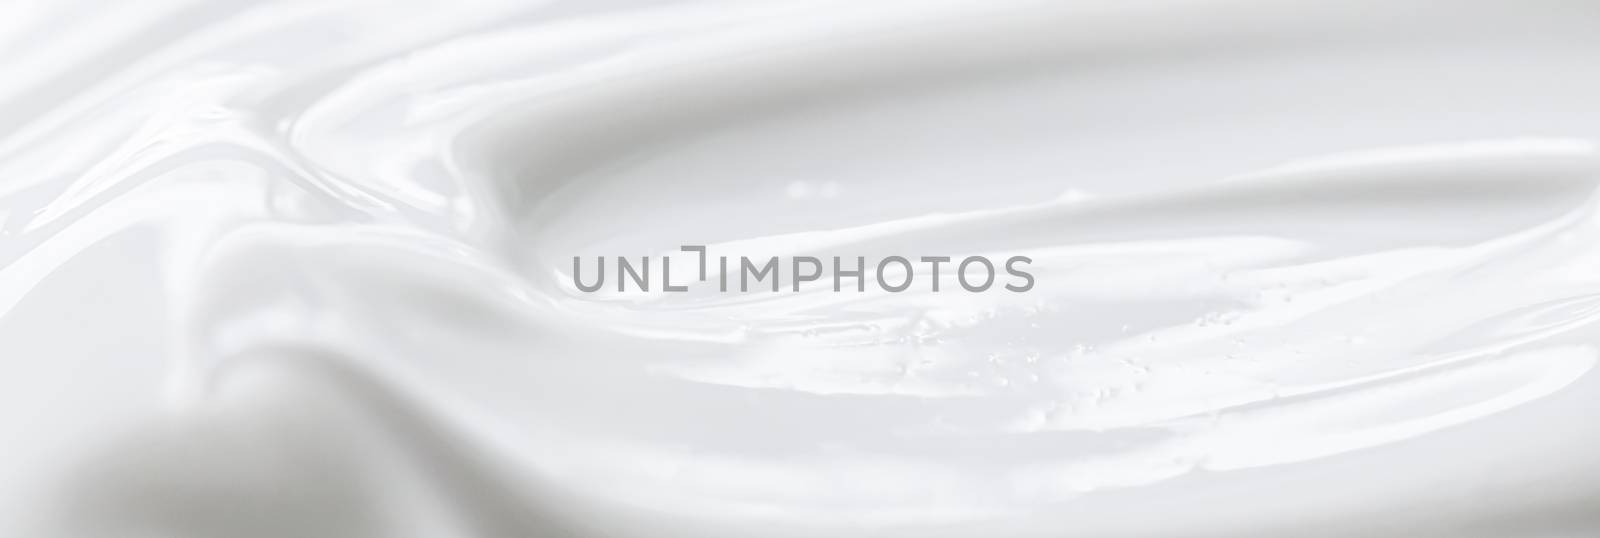 Pure white cream texture as abstract background, food substance or organic cosmetic by Anneleven